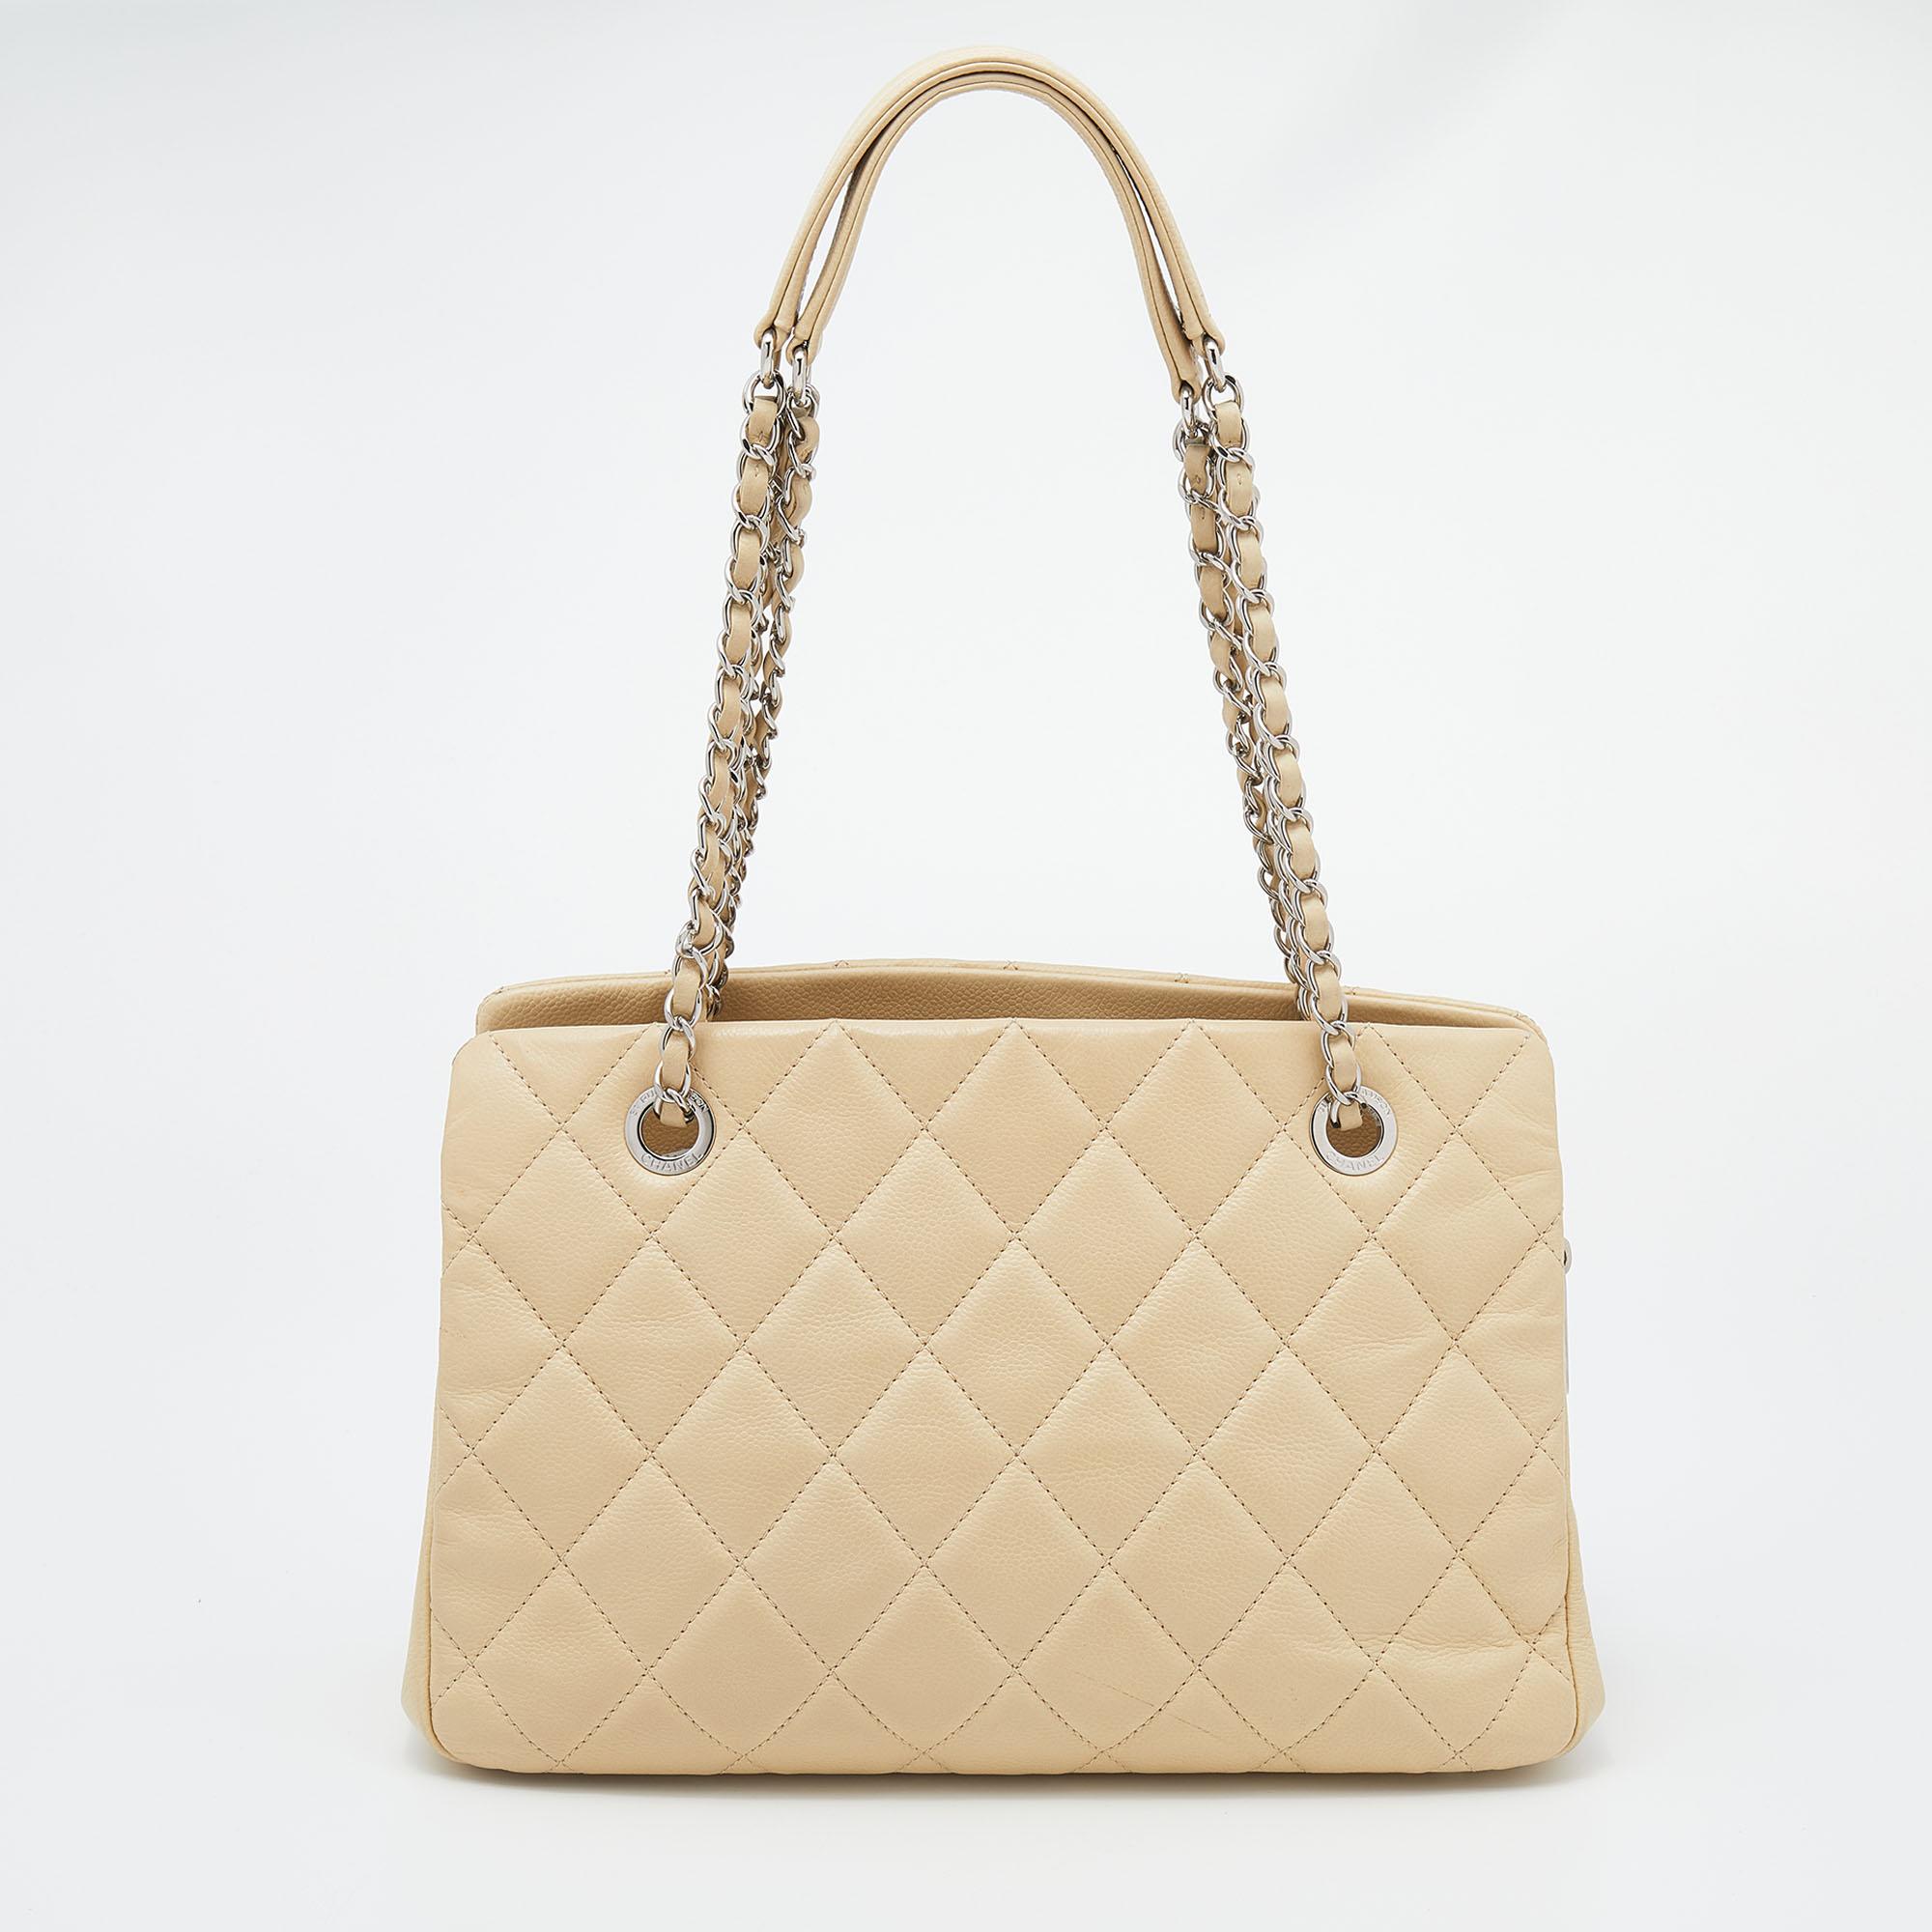 Give your wardrobe an instant elegant boost with this stunning Timeless tote from Chanel. It has been crafted from leather in the signature quilt design and features dual chain-link handles, silver-tone hardware detailing, and protective metal feet.